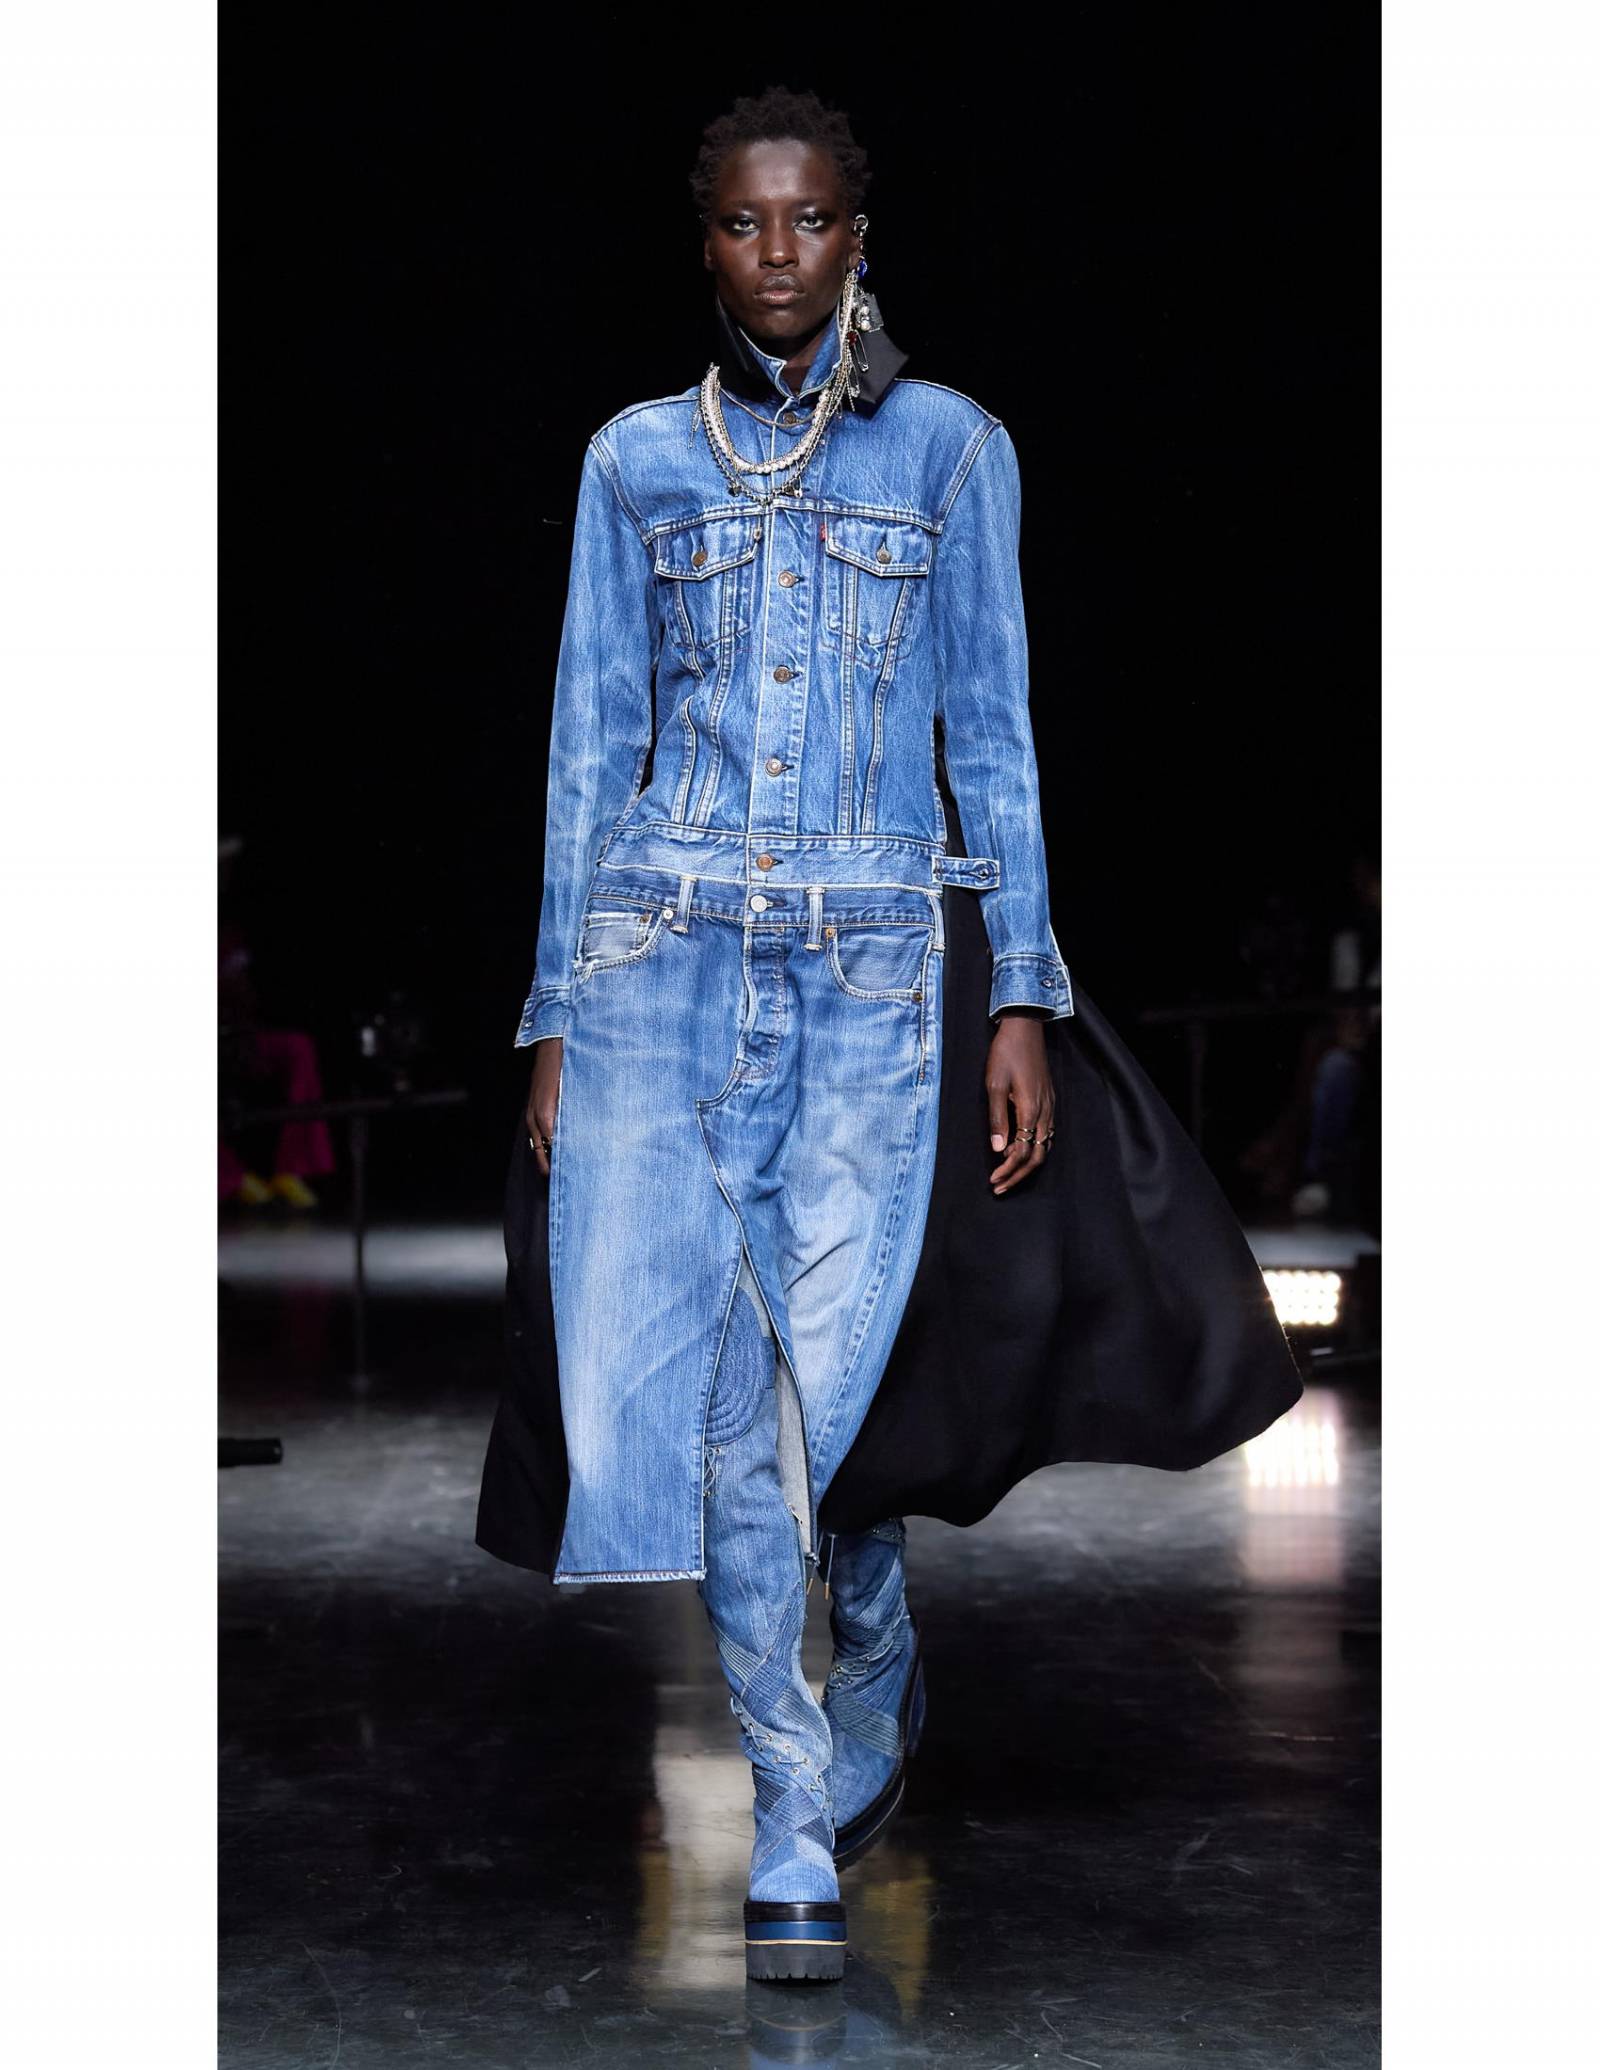 Upcycled Levi’s at the Gaultier Paris by @sacaiofficial FW 2021-22 Haute Couture show